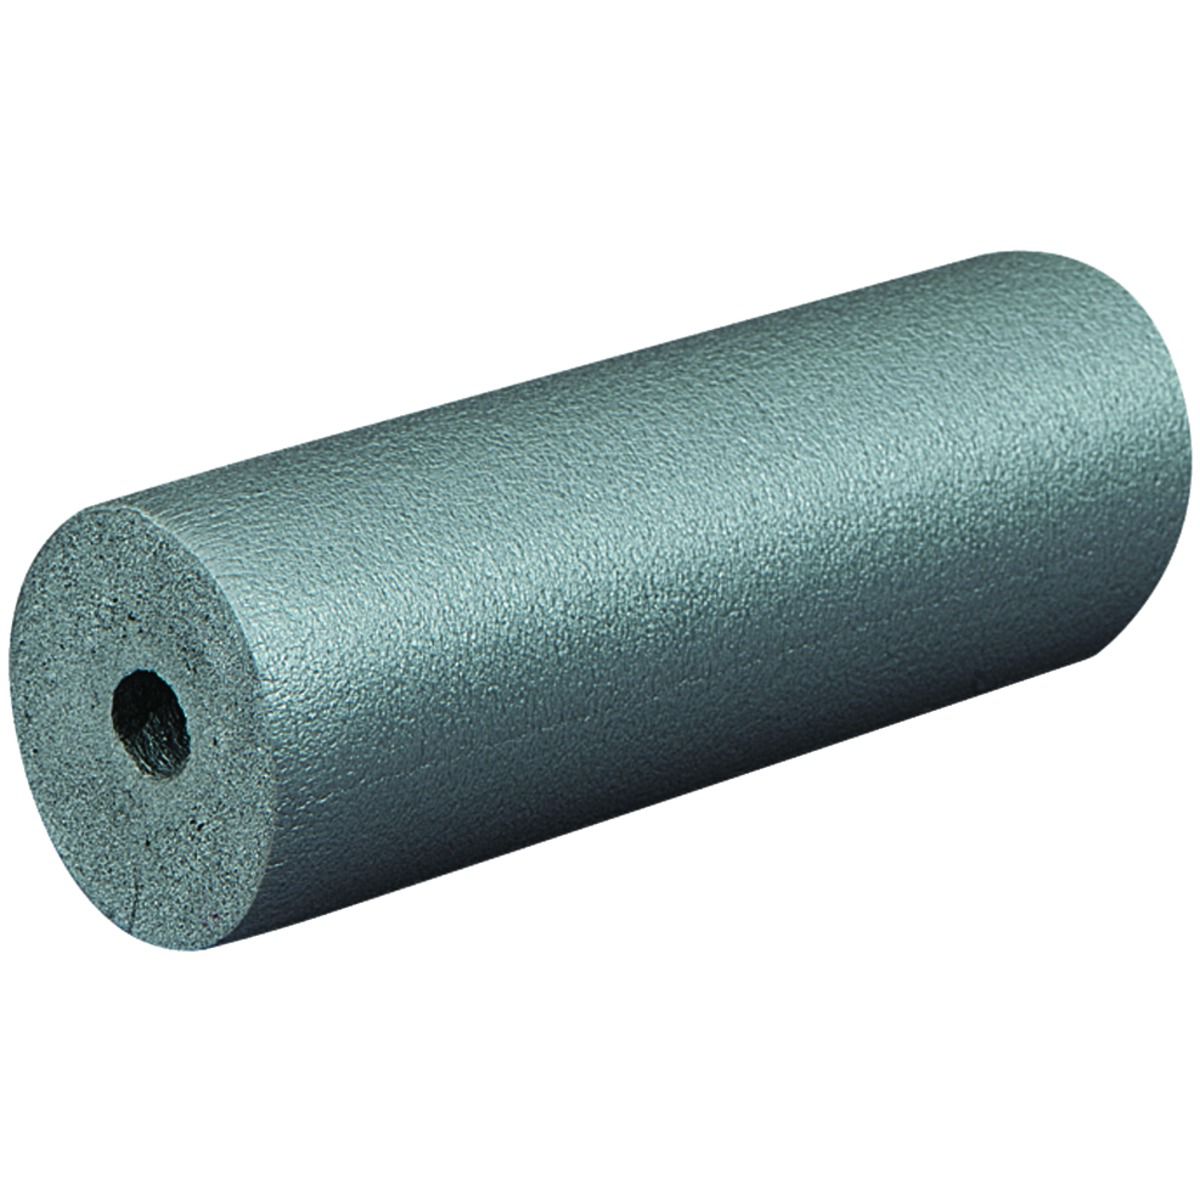 Image of Wickes Pipe Insulation Byelaw 15 x 1000mm Pack 3